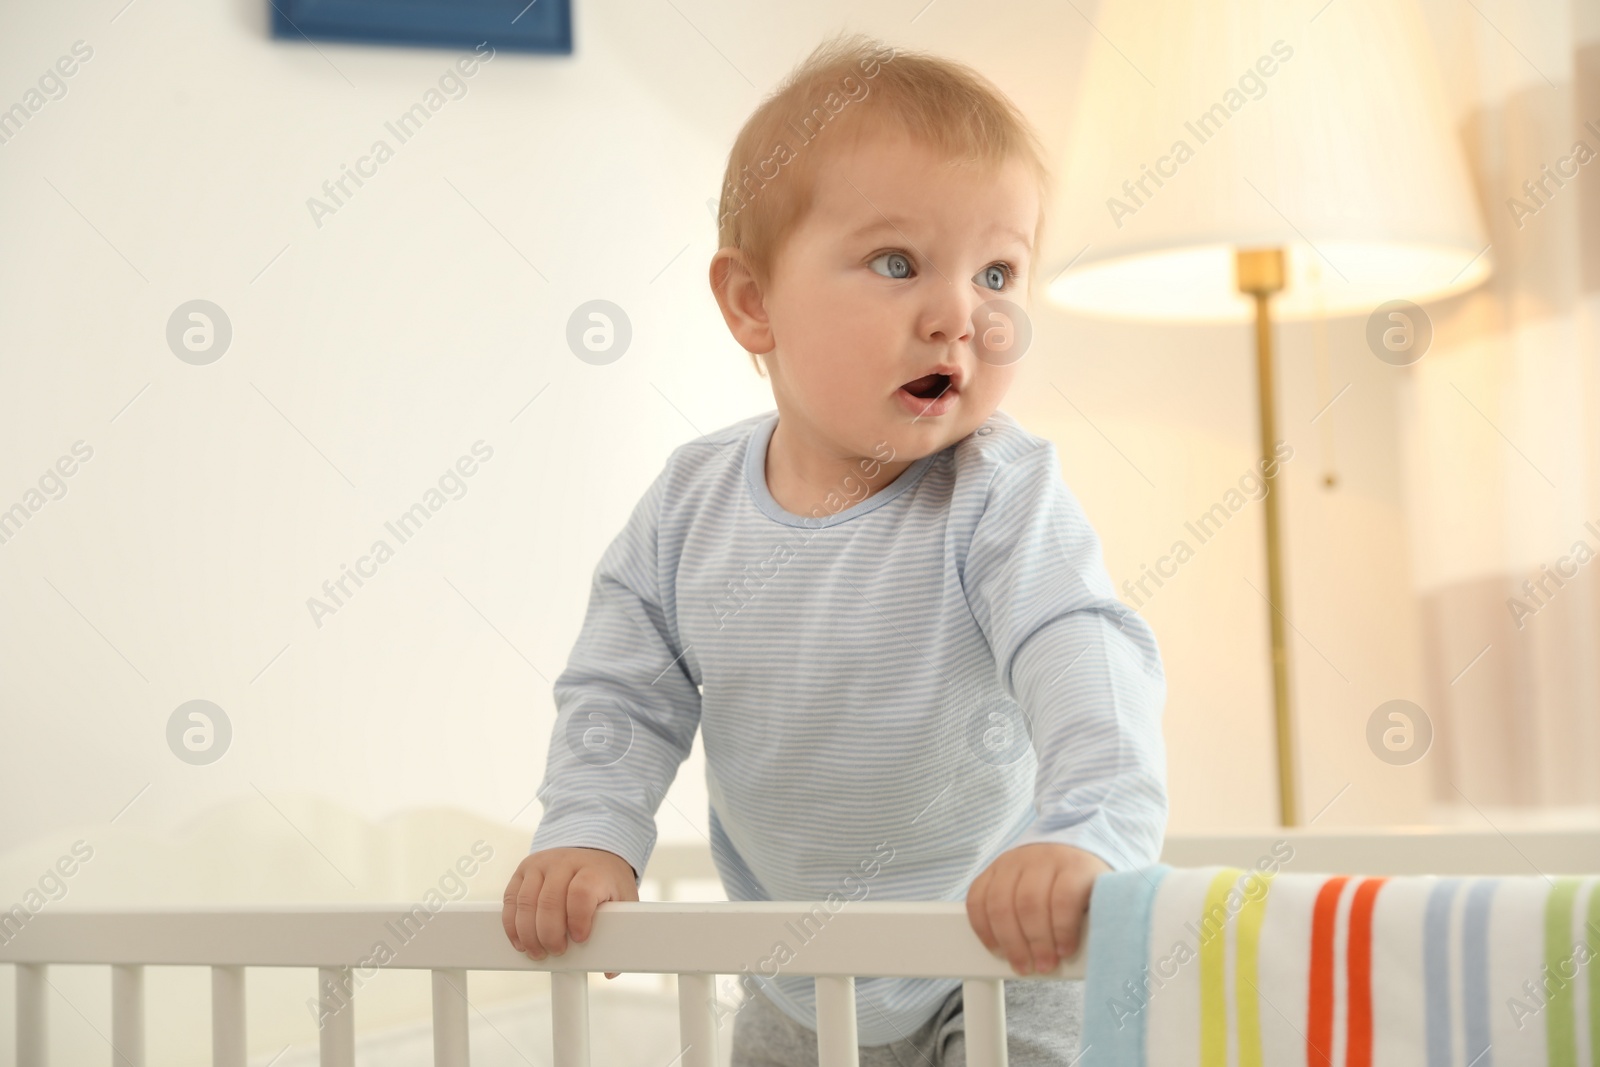 Photo of Cute little baby in crib at home